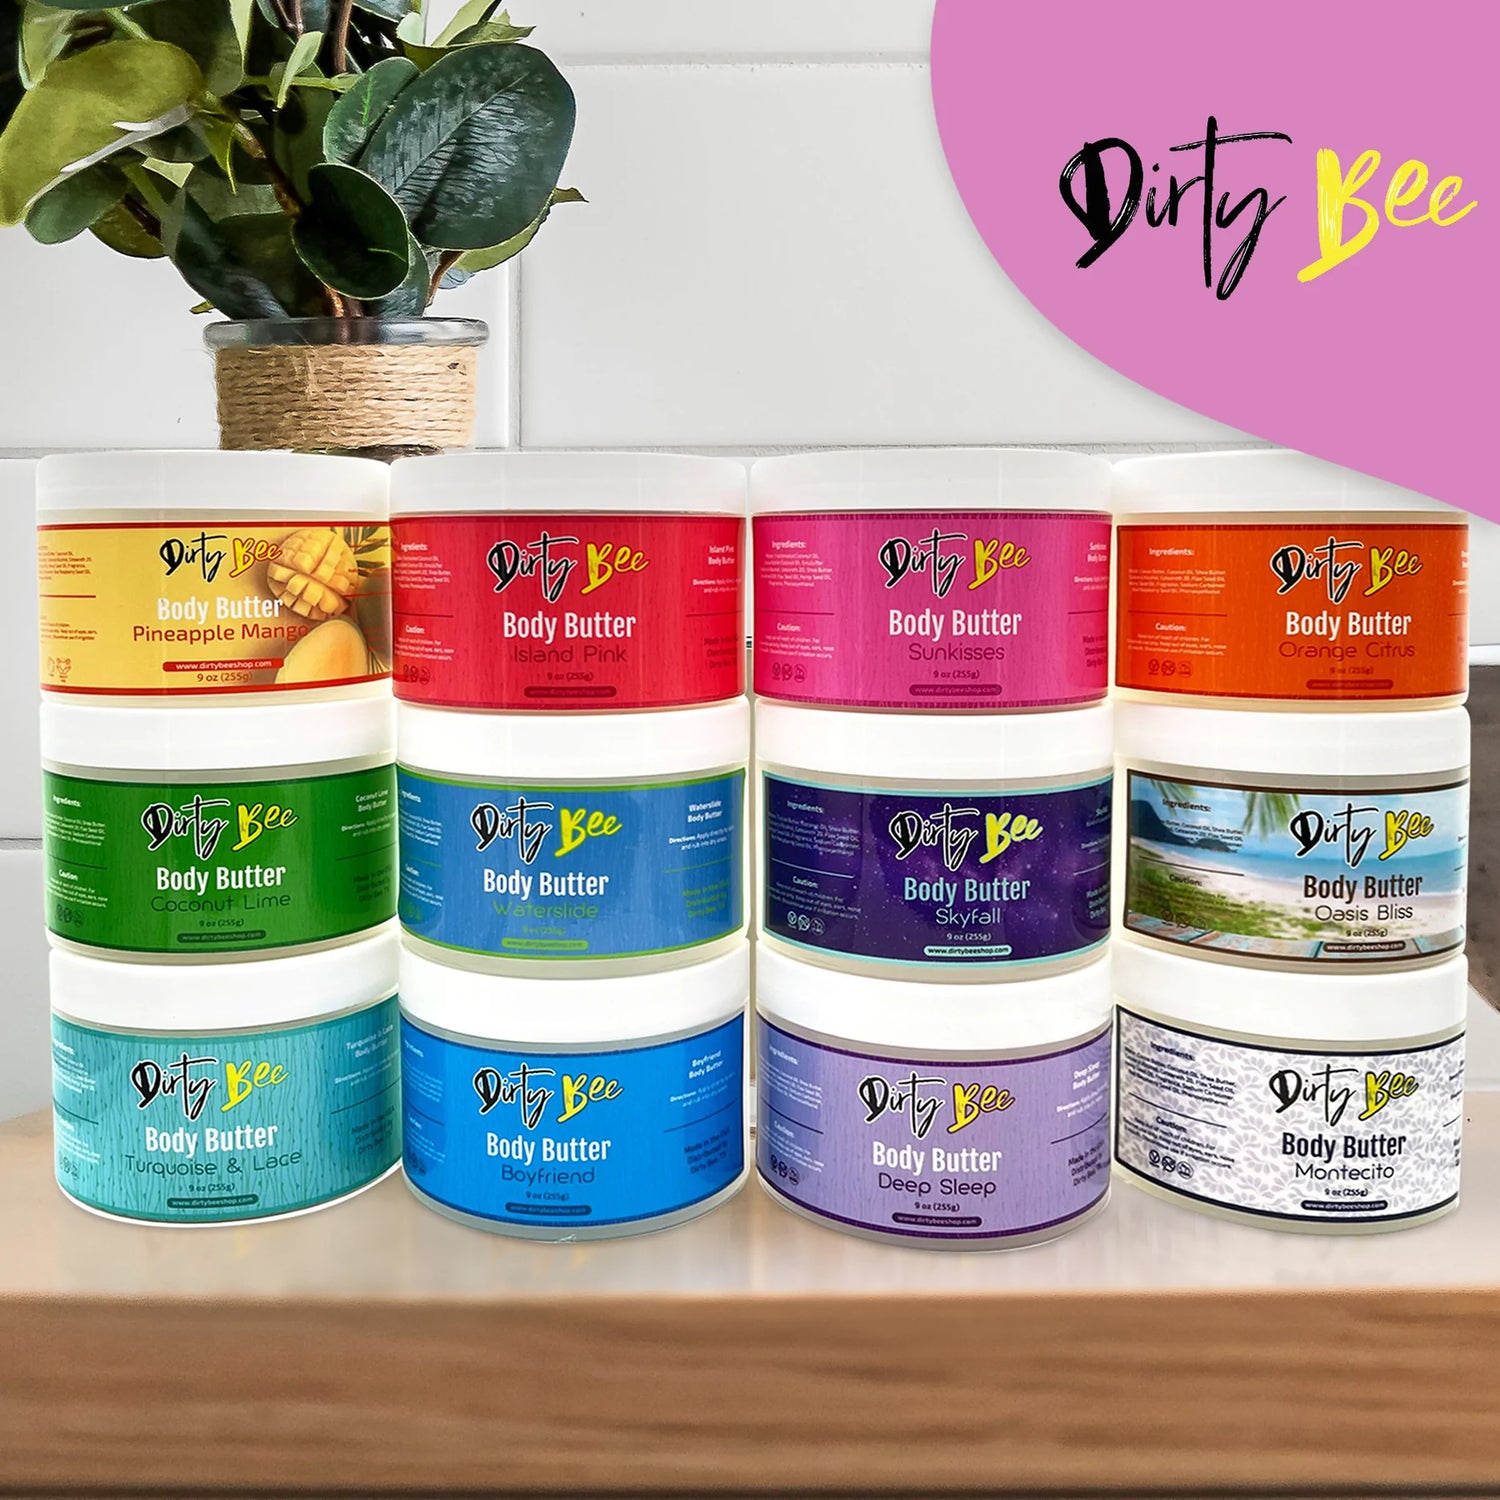 Dirty Bee Famous Body Butter